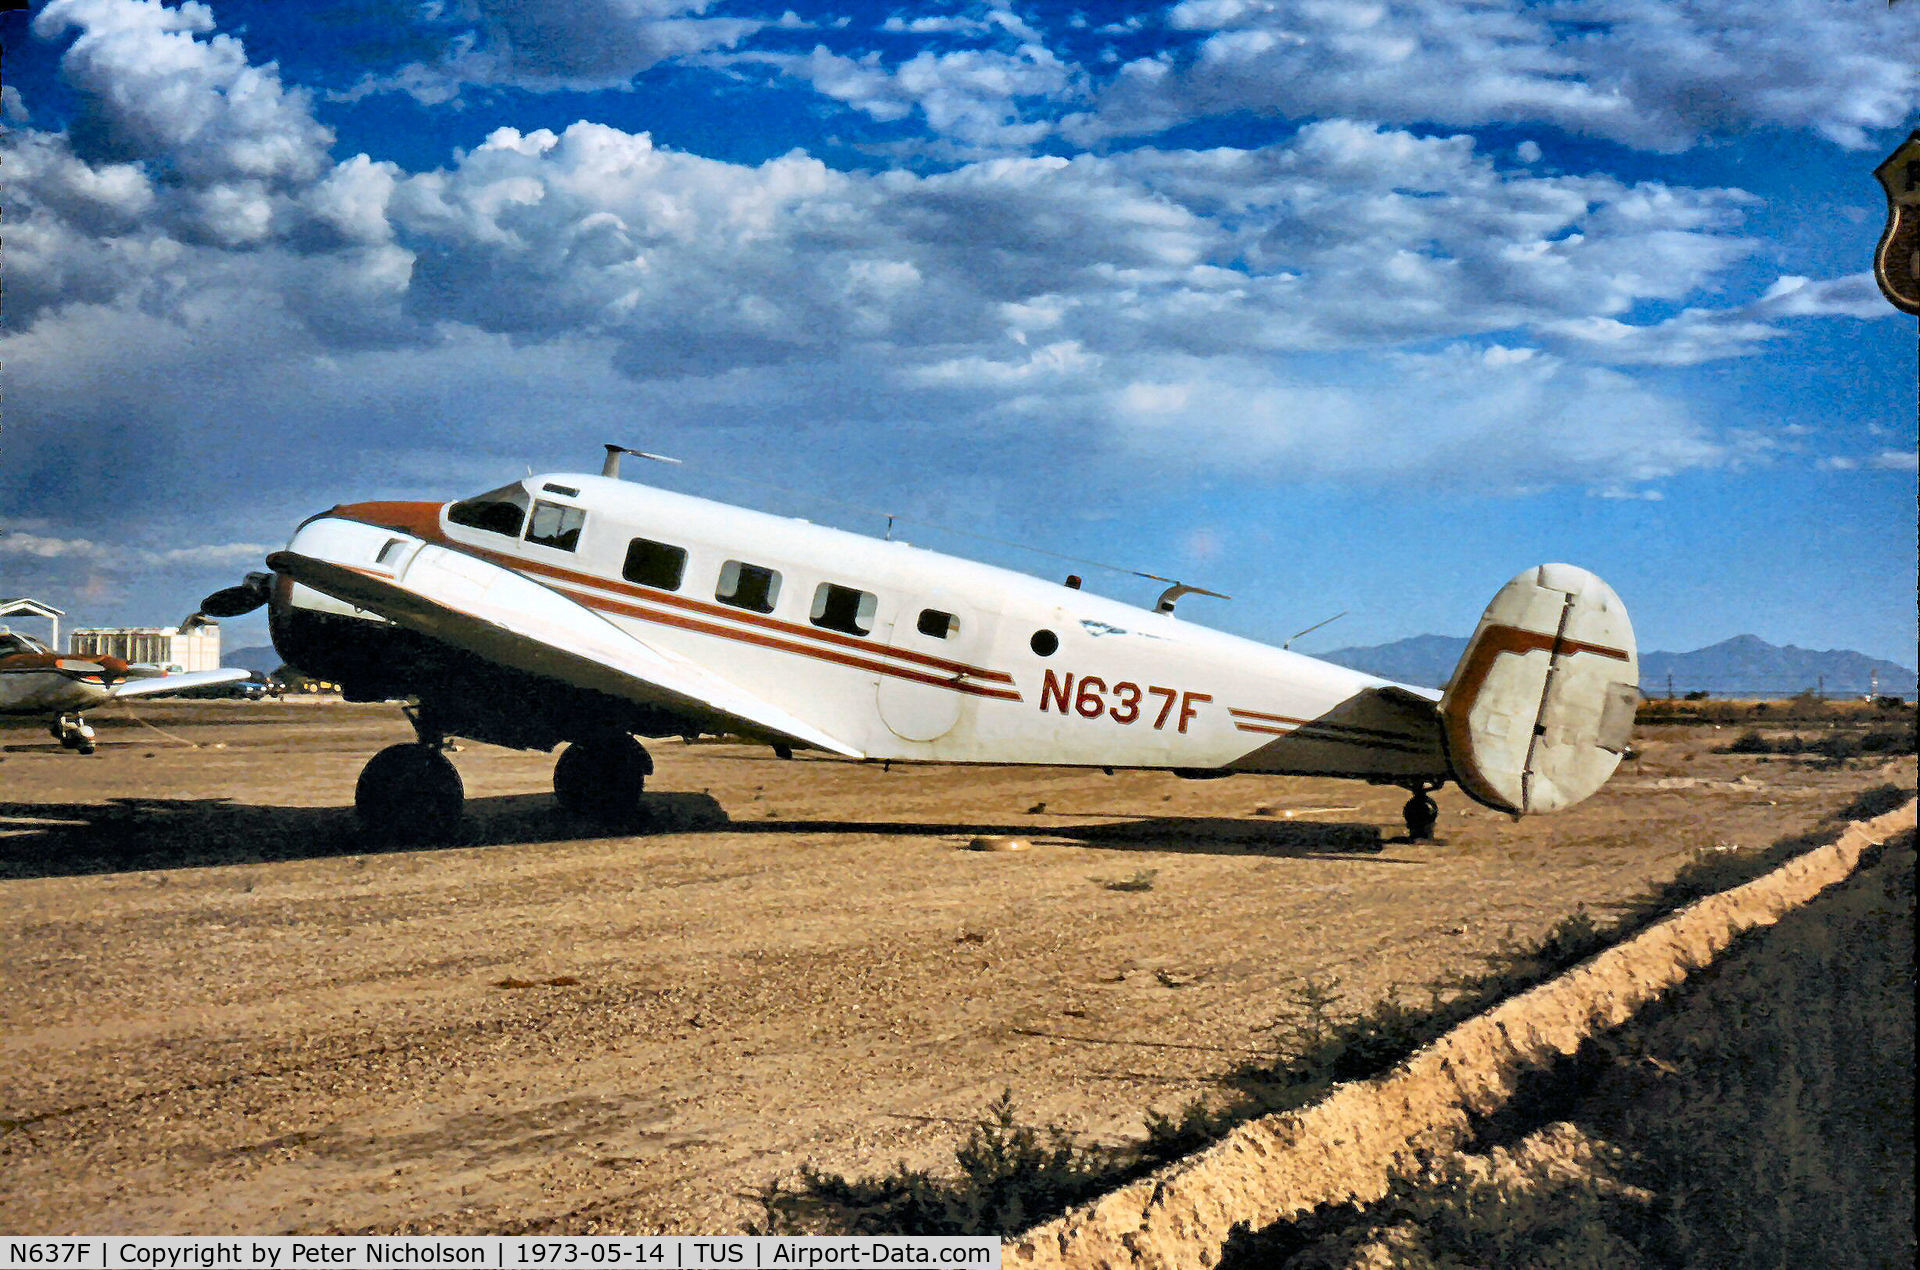 N637F, 1948 Beech D18S C/N A-438, Beech D18S as seen at Tucson in May 1973.